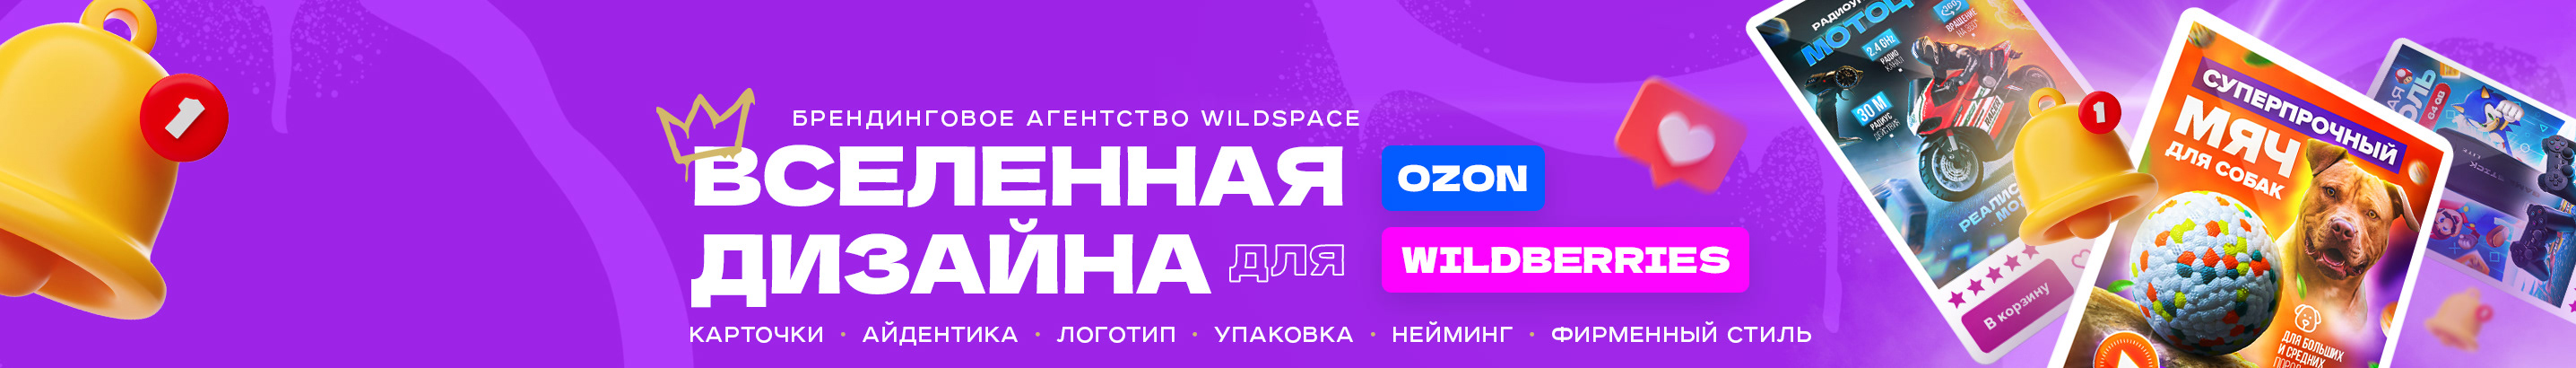 WildSpace Agency's profile banner